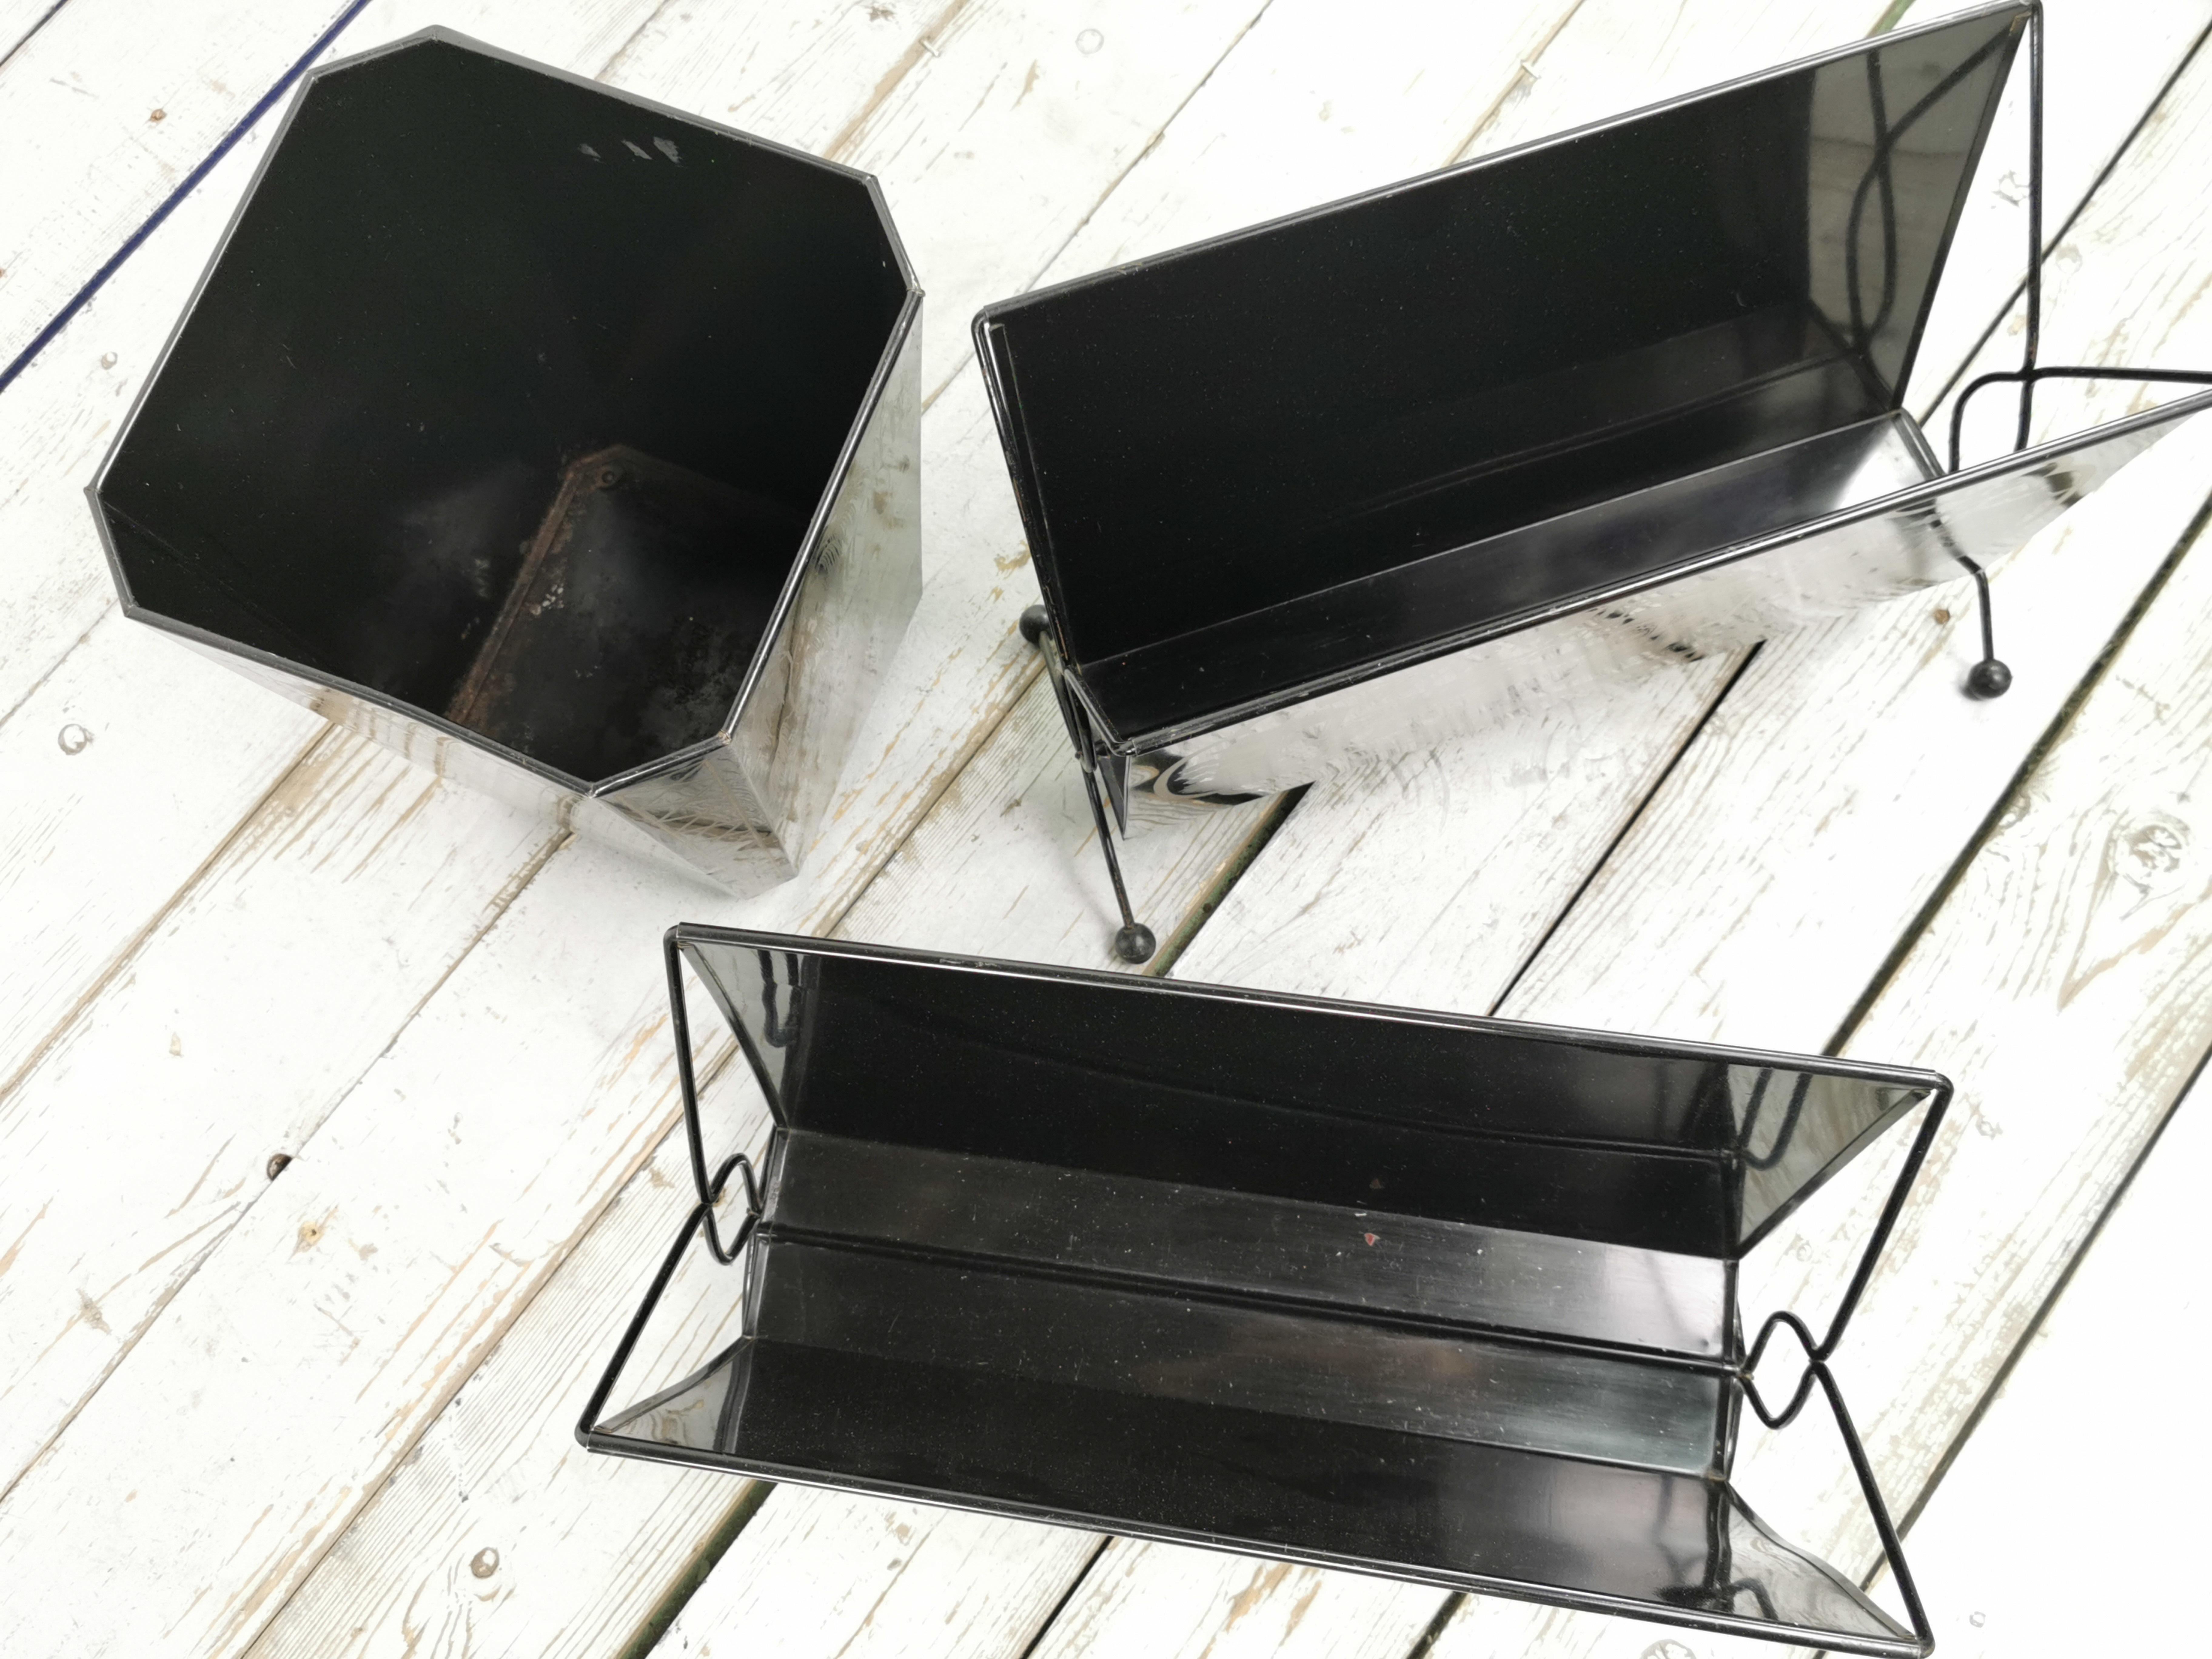 Mid-century tin worcester ware chinoiserie magazine racks and matching waste bin.

Offered for sale and sold as one lot, a pair of mid-century, 1960s Worcester Ware magazine racks or newspaper holders with a matching waste paper bin made of tin.